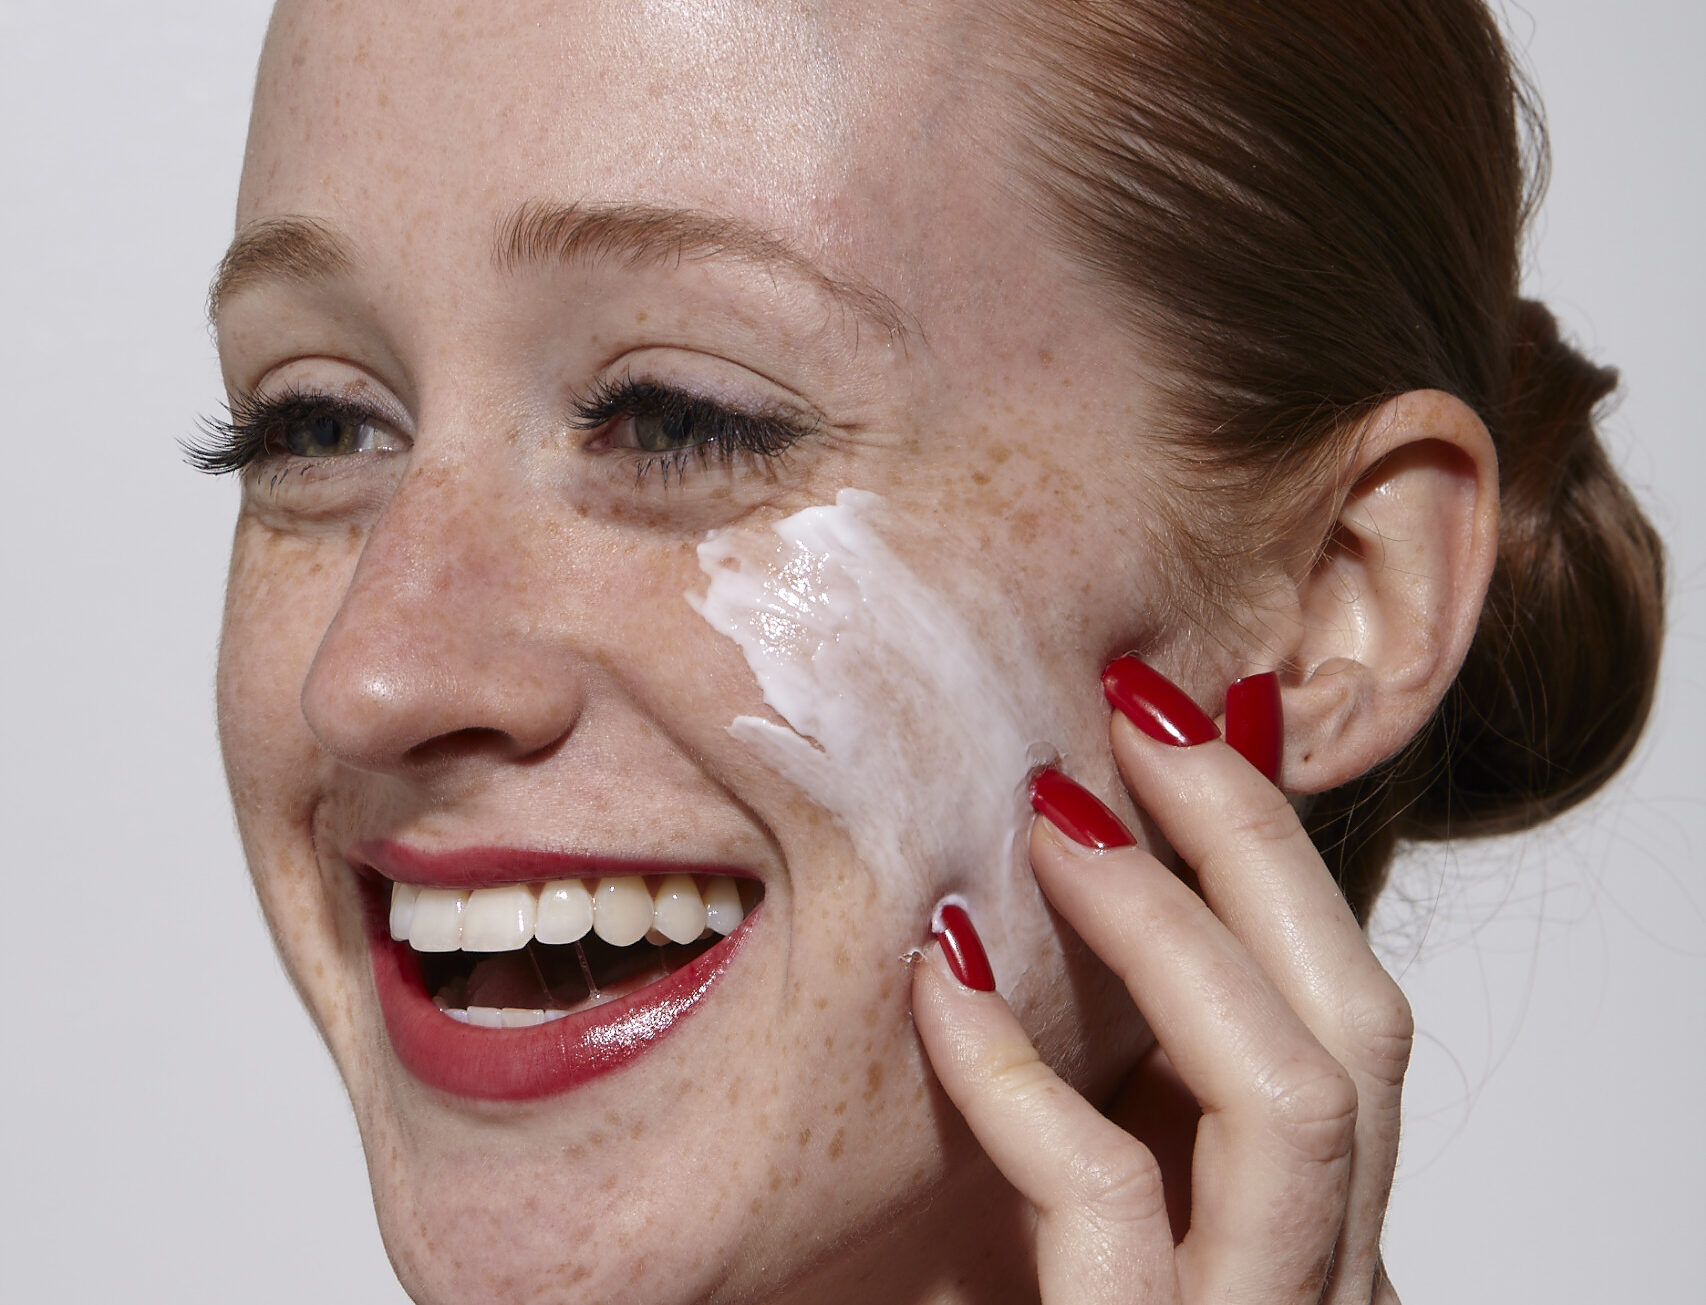 How Redheads Can Apply Sunscreen When Wearing Makeup